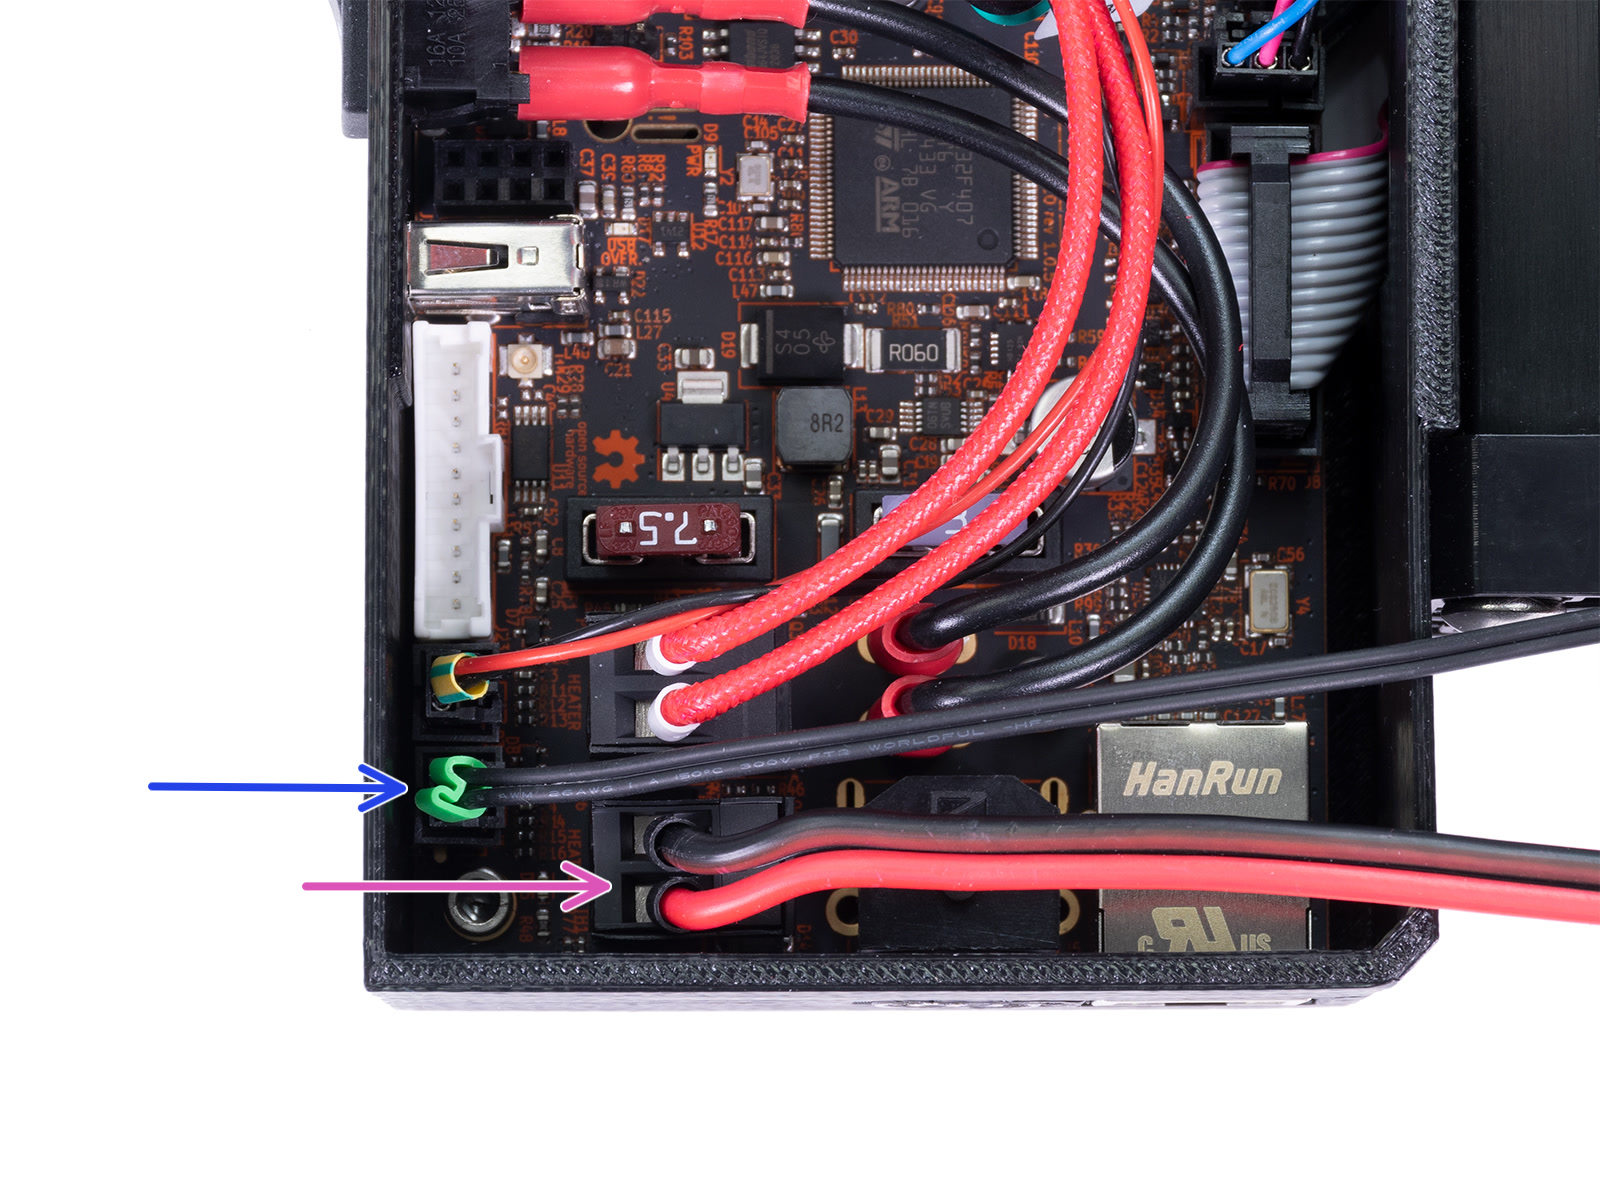 Connecting the heatbed cable